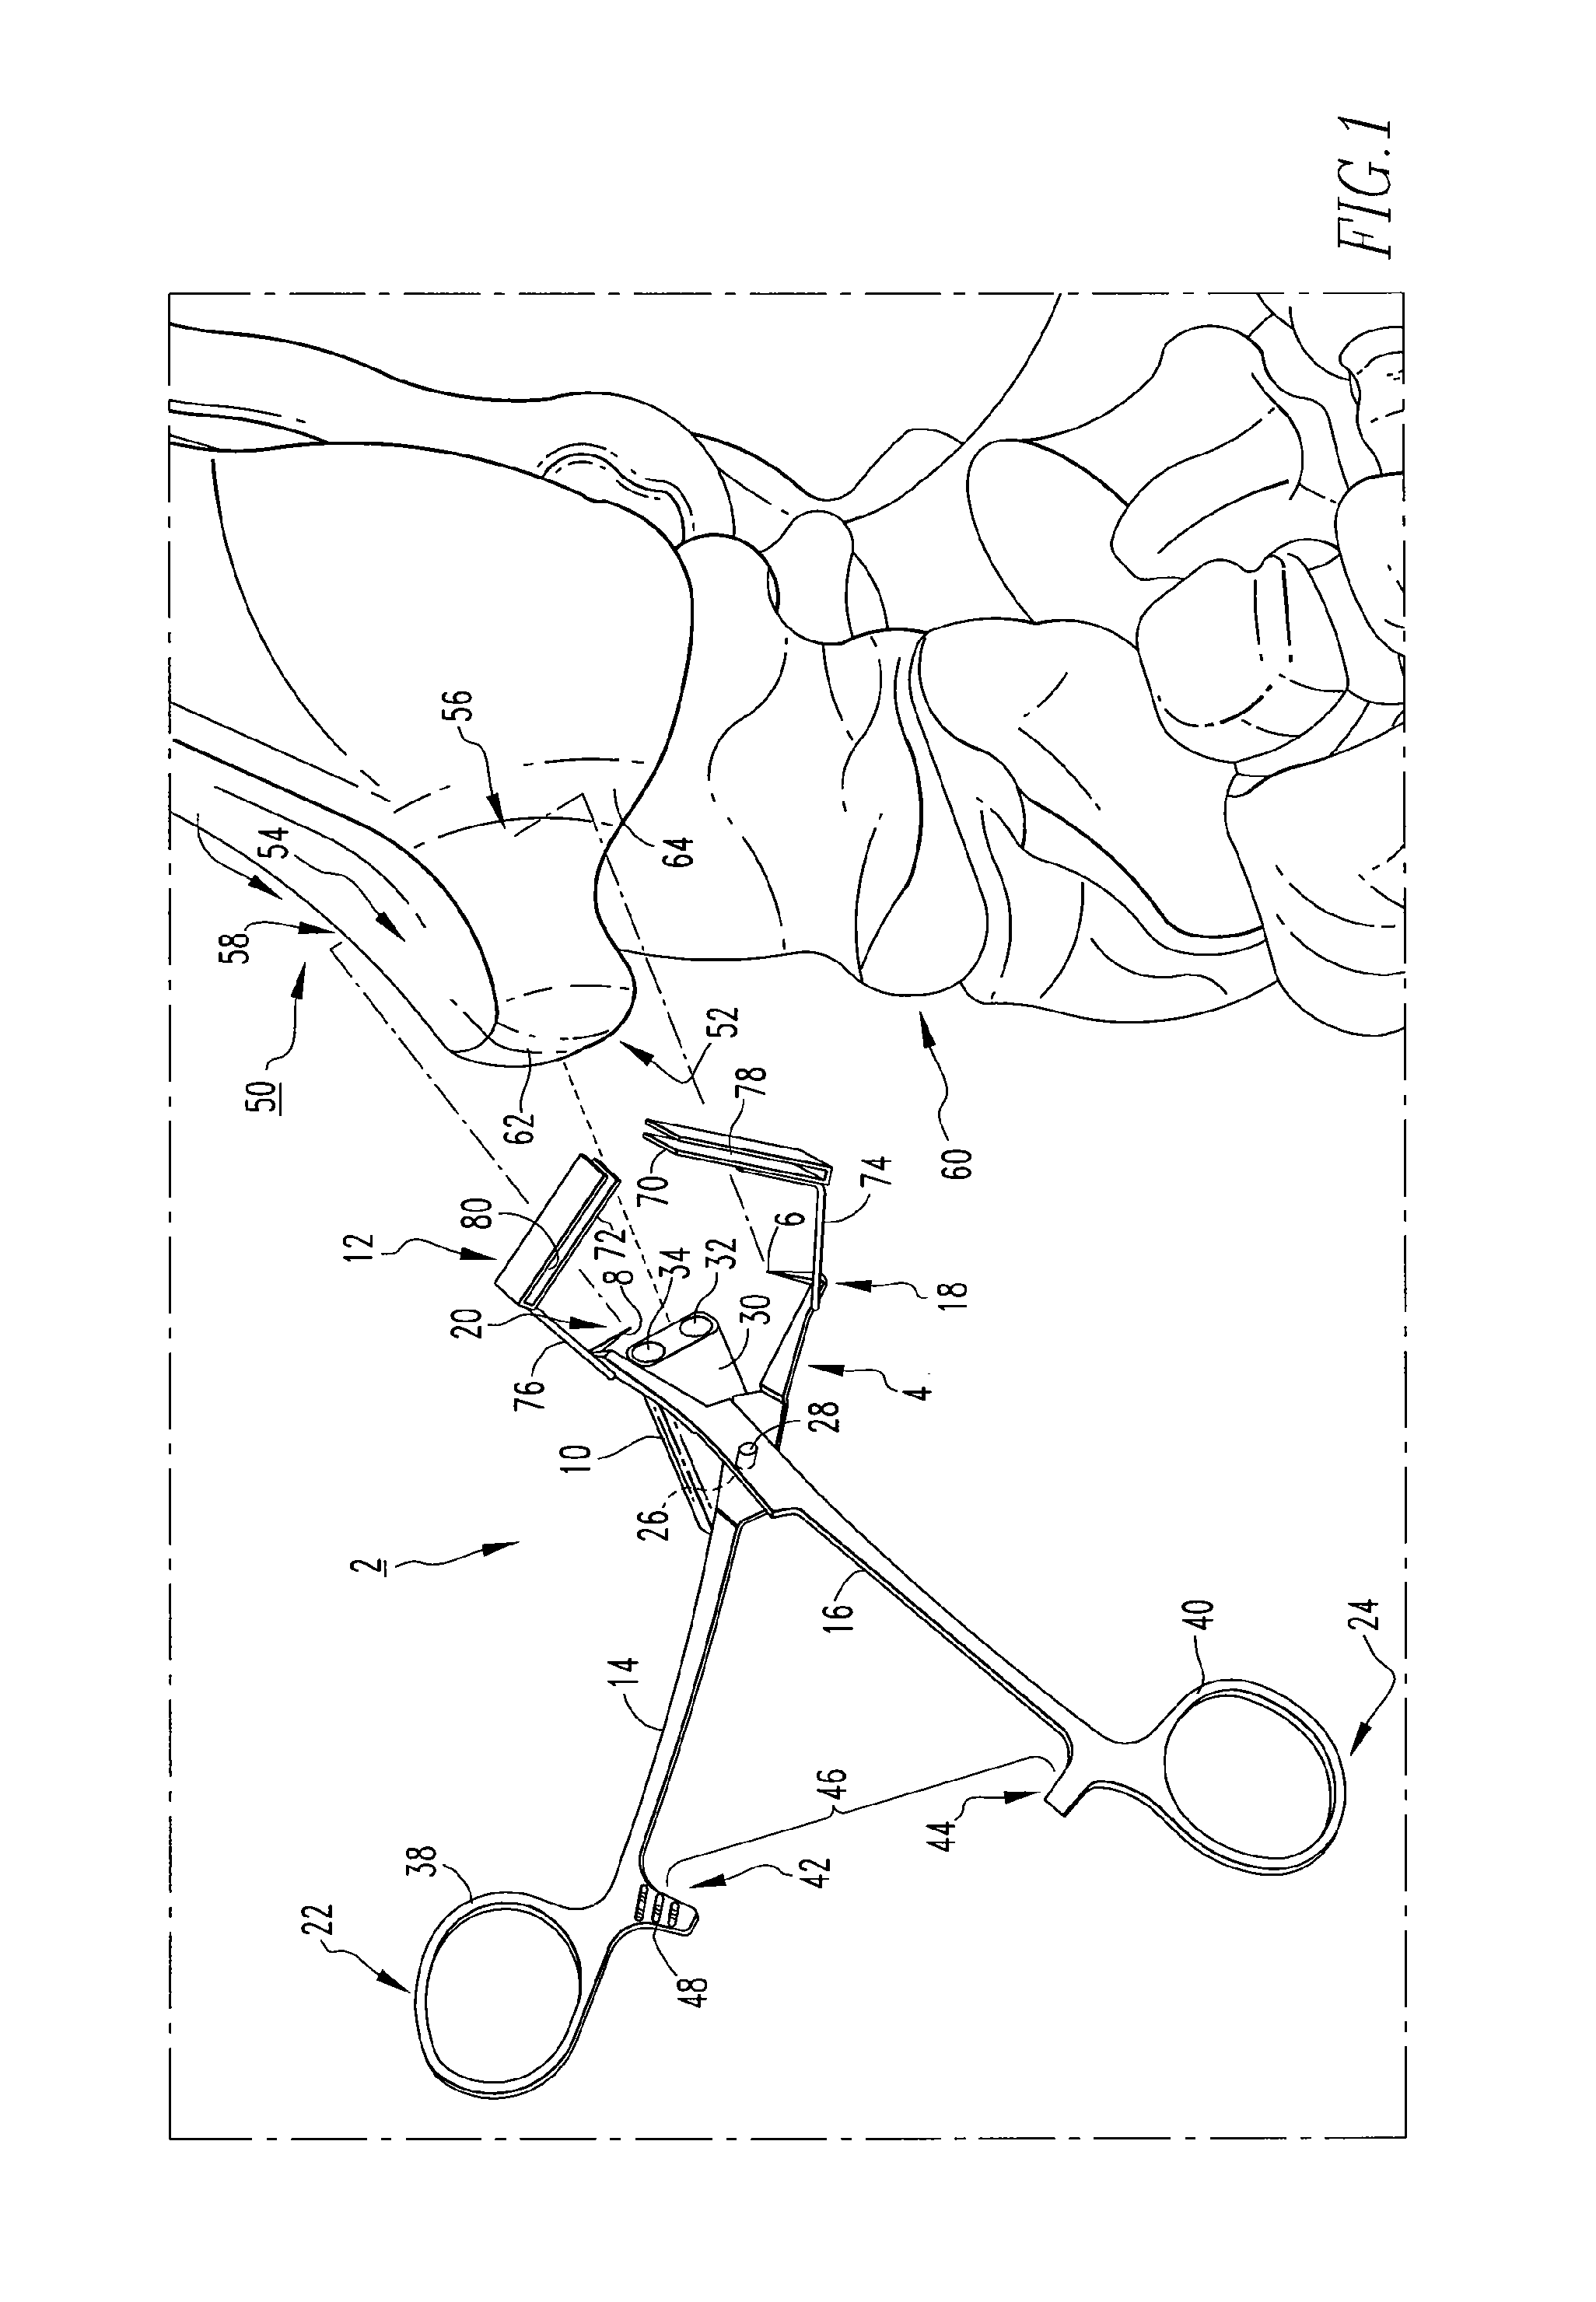 Osteotomy Guide and Method of Cutting the Medial Distal Tibia Employing the Same